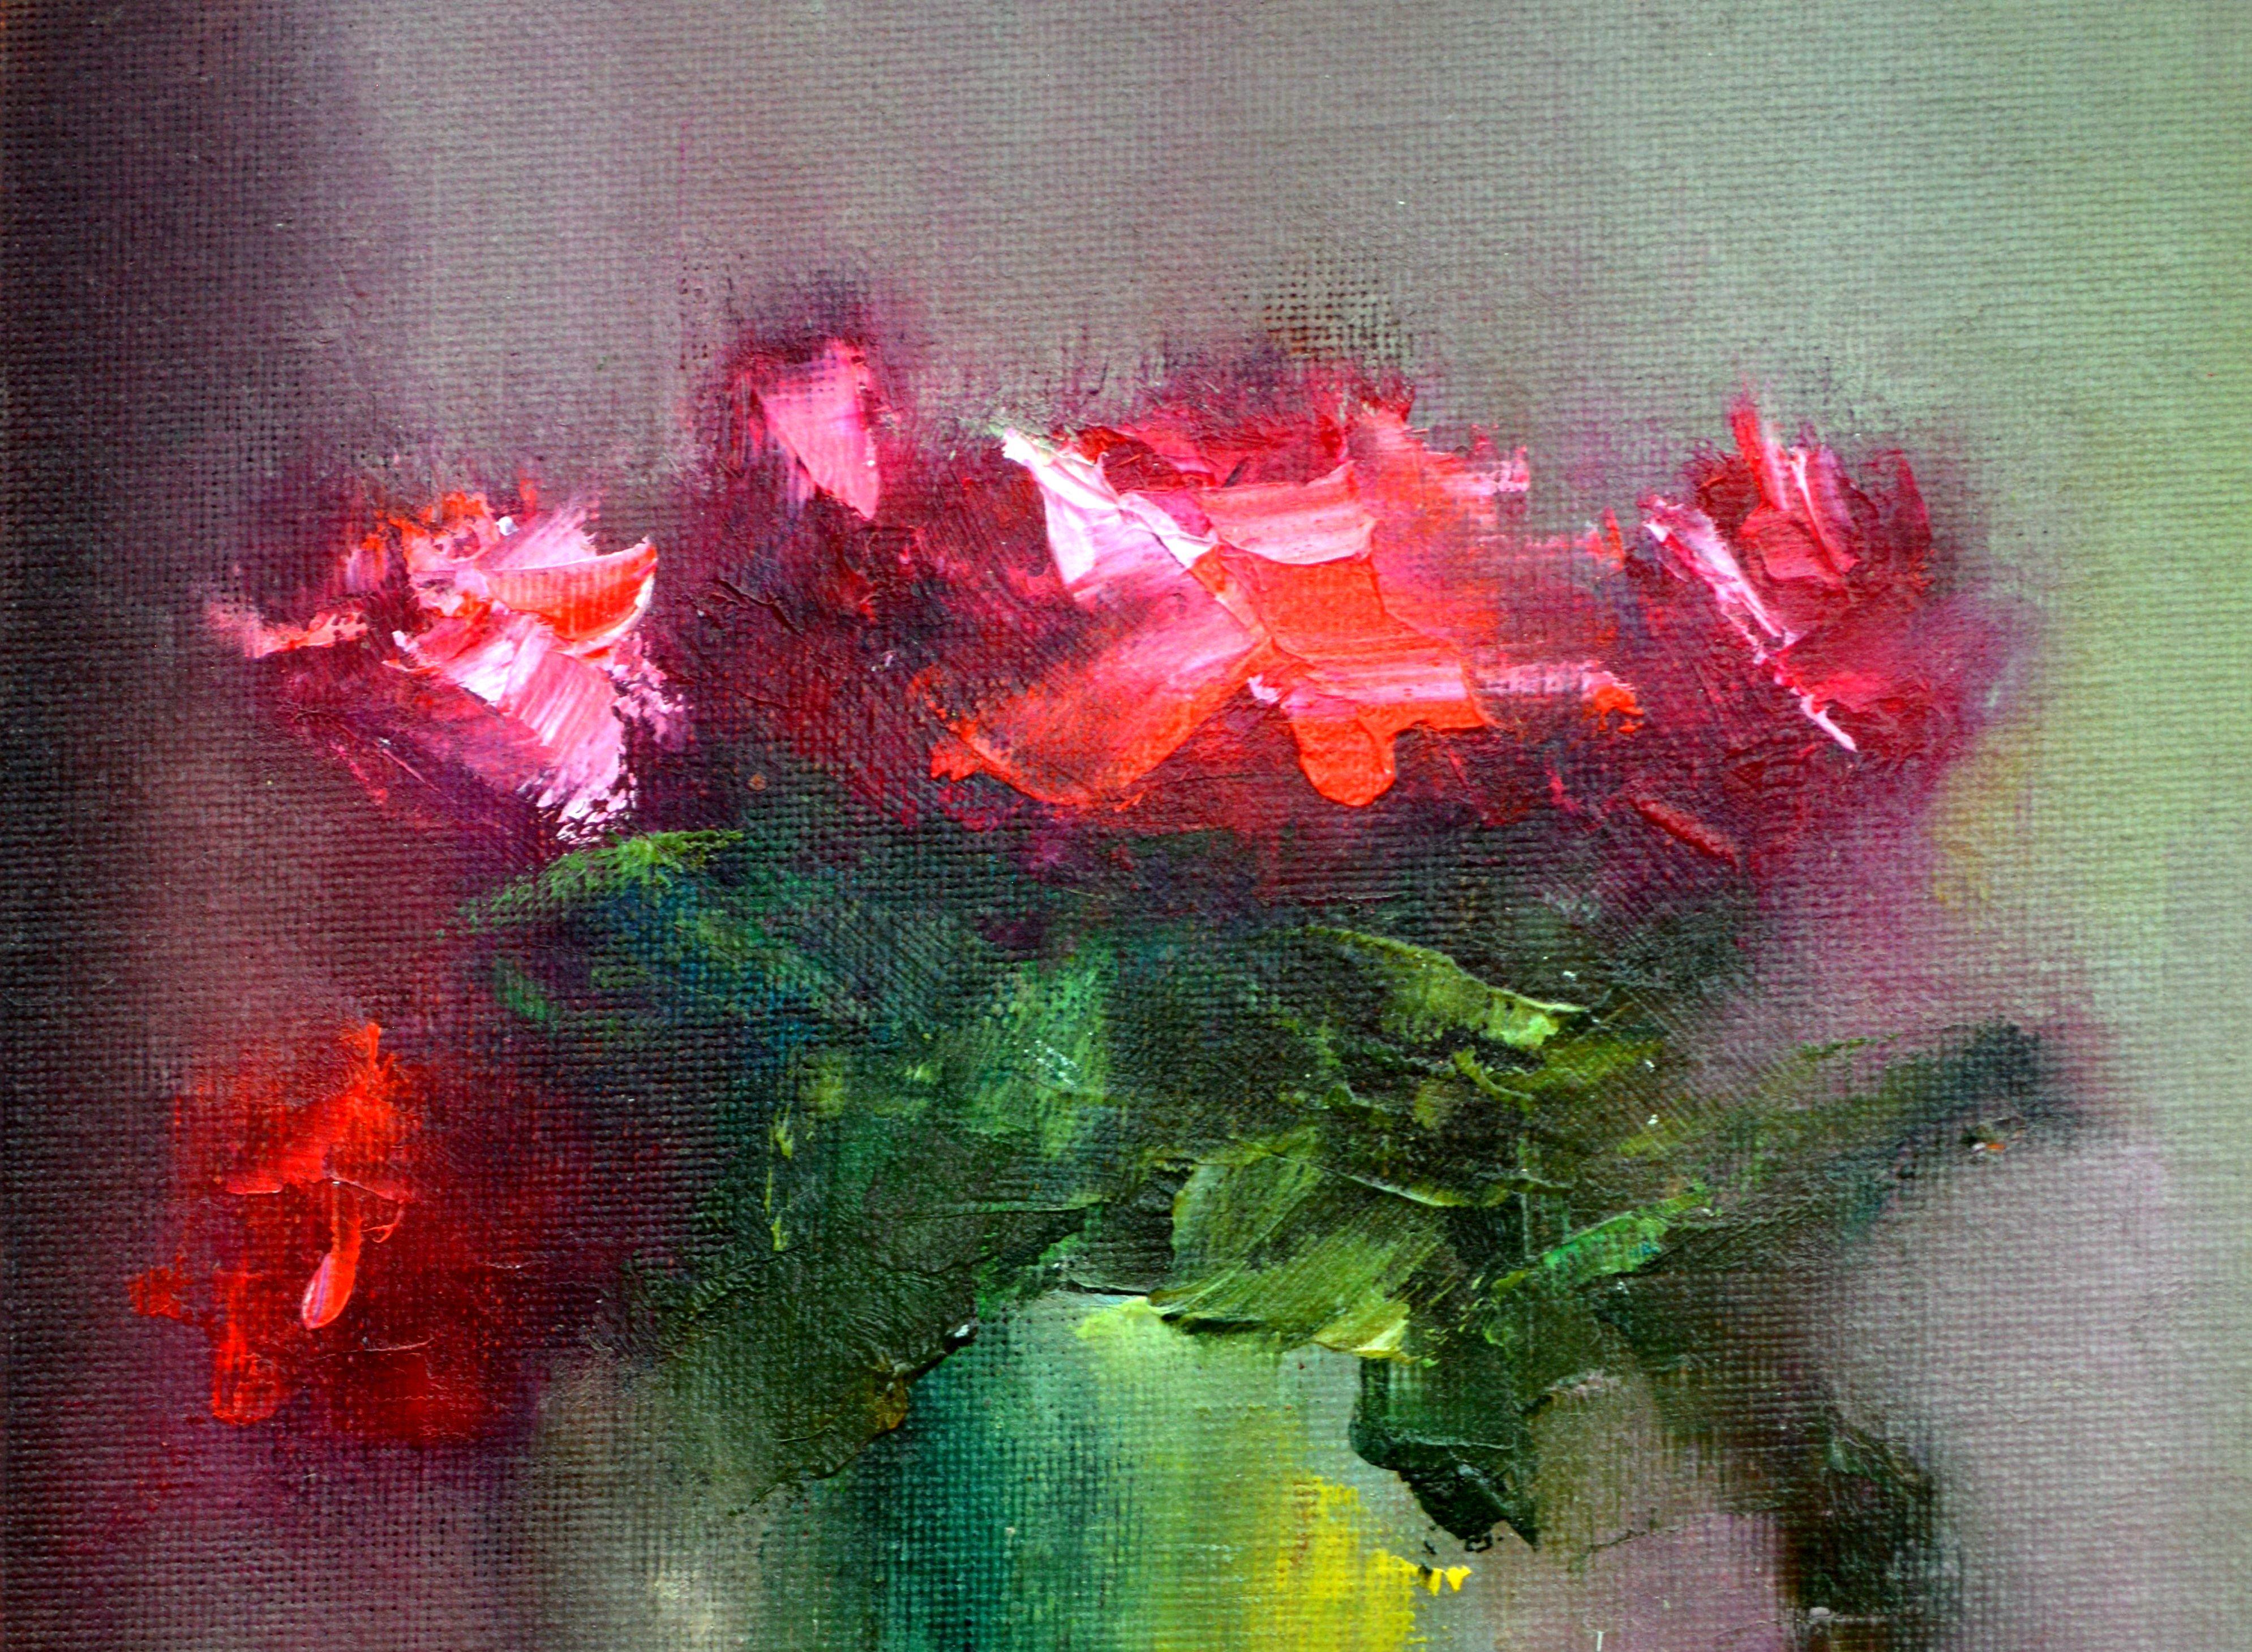 Roses 24X18 oil on canvas.Valentine’s Day gifts art.  - Painting by Elena Lukina